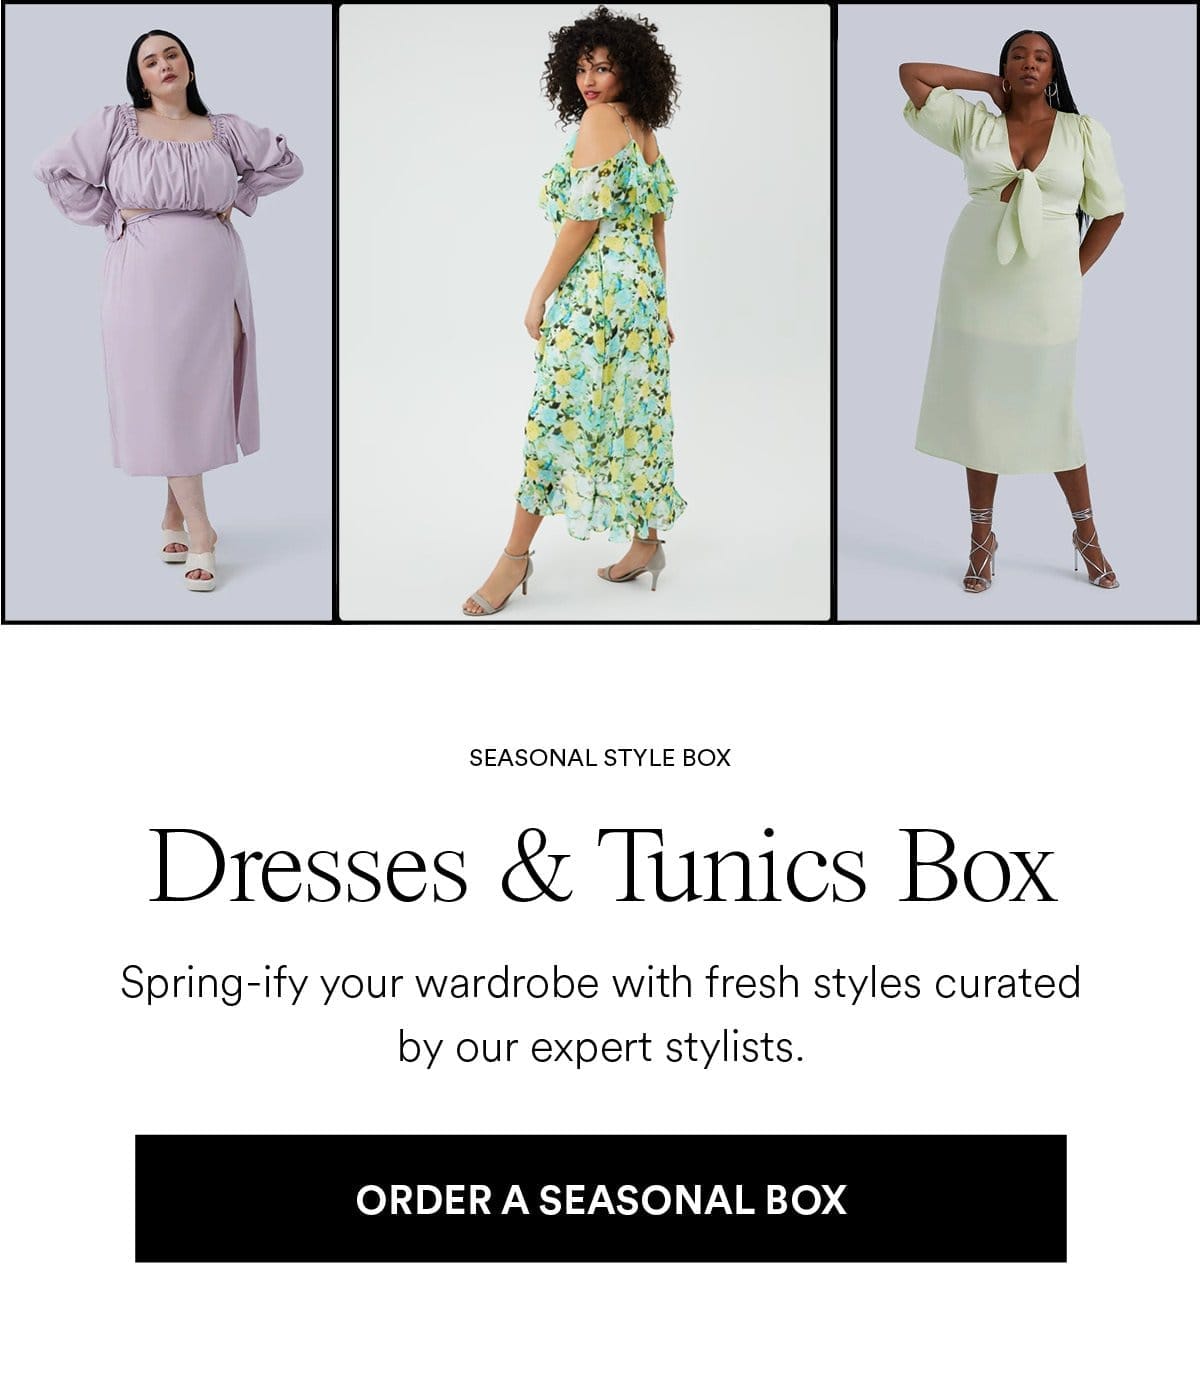 Dresses & Tunics Box. Spring-ify your wardrobe with fresh styles curated by our expert stylists. Order A seasonal Box